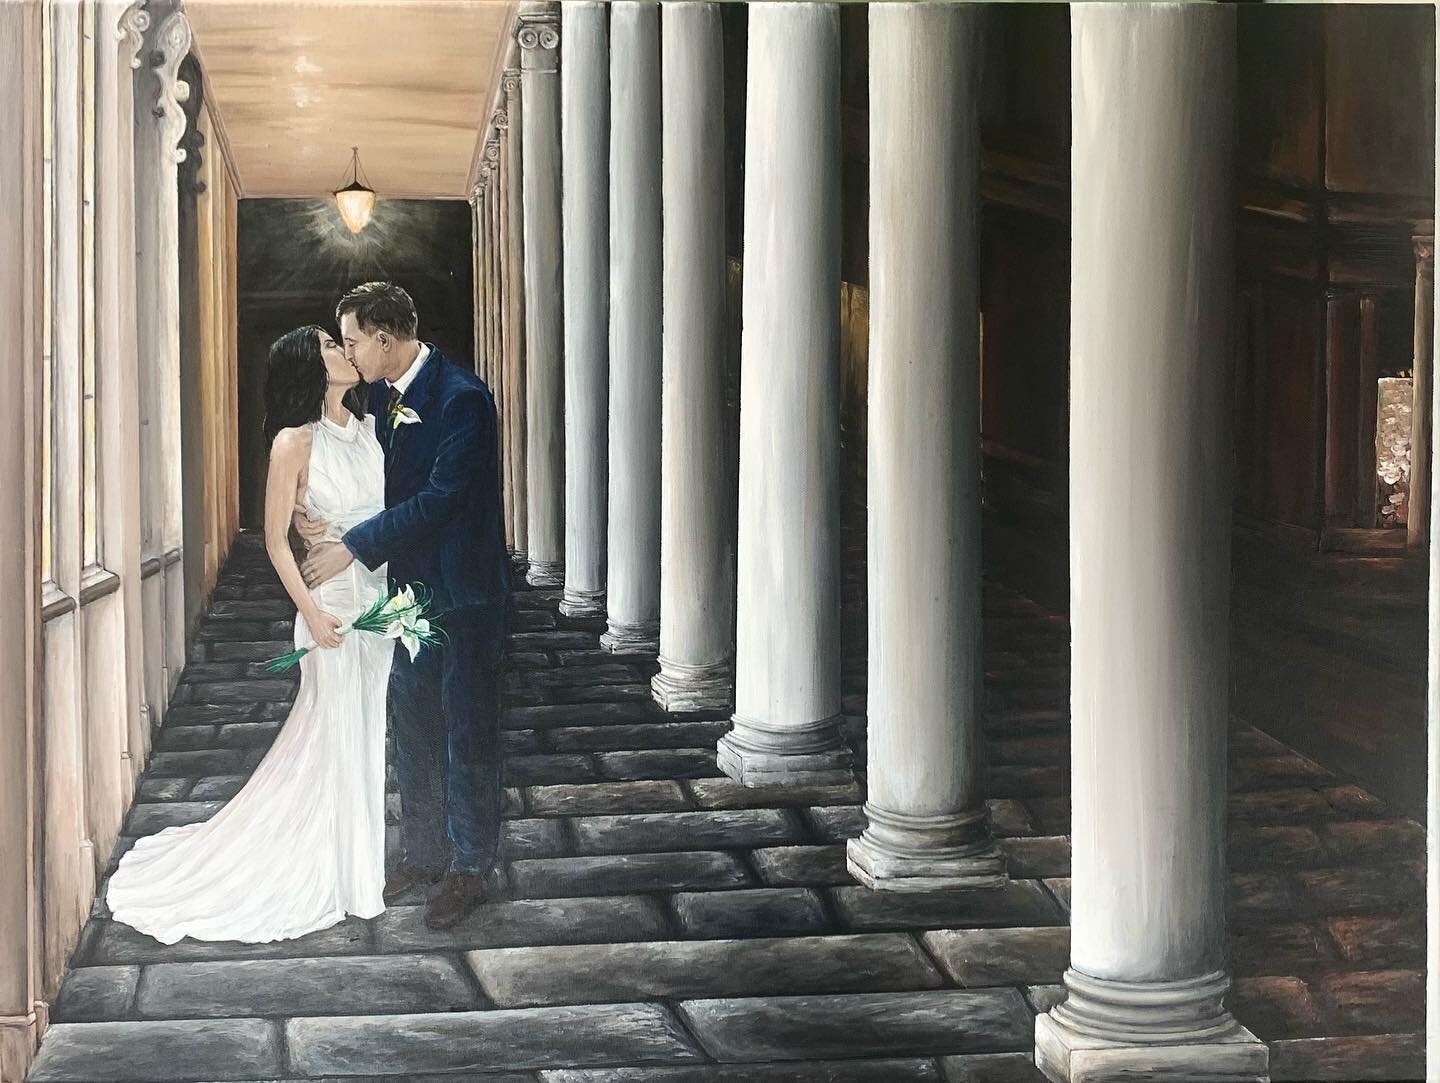 &ldquo;First Kiss&rdquo;

Platinum package 
24&rdquo; x 30&rdquo; canvas
Arclyic and oil paint
Hours to complete: 40+

Swipe for close up ➡️

This couple got married in the @romanbathsuk after dark. It was an extremely intimate ceremony, just their i